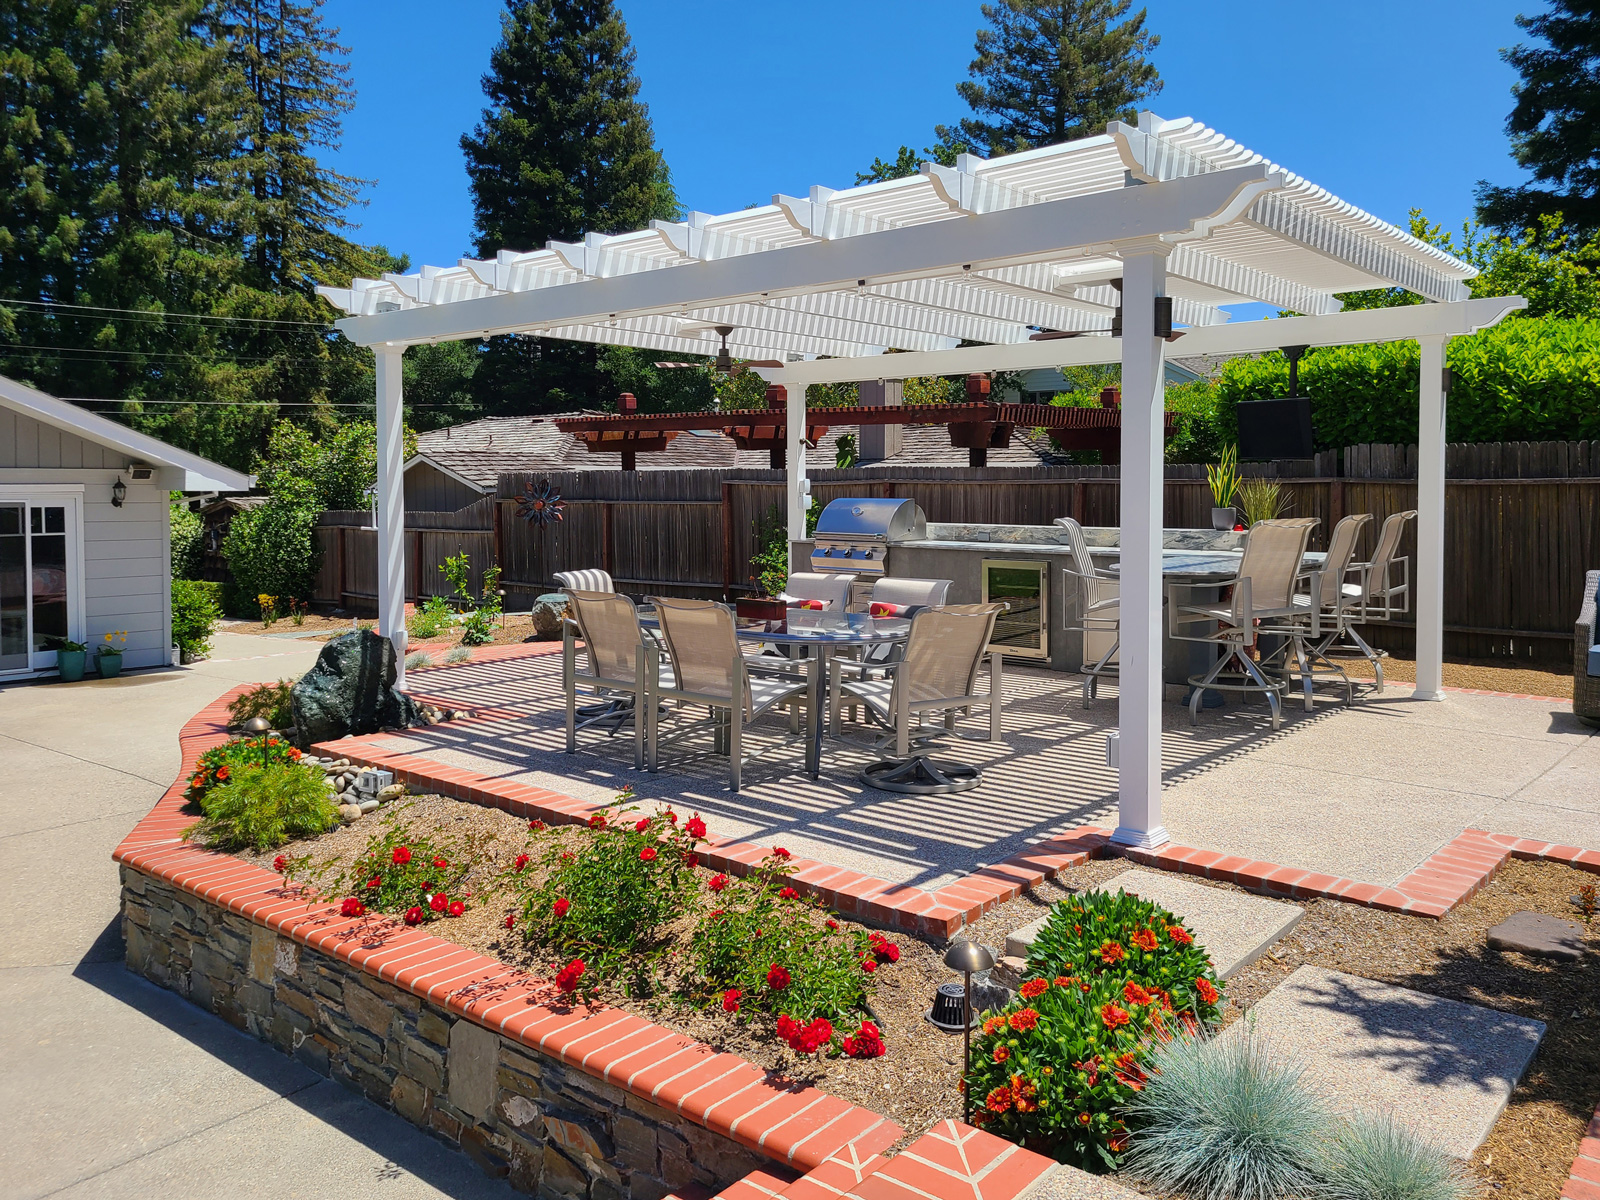 free standing pergola over a raised patio outdoor kitchen and dining area.